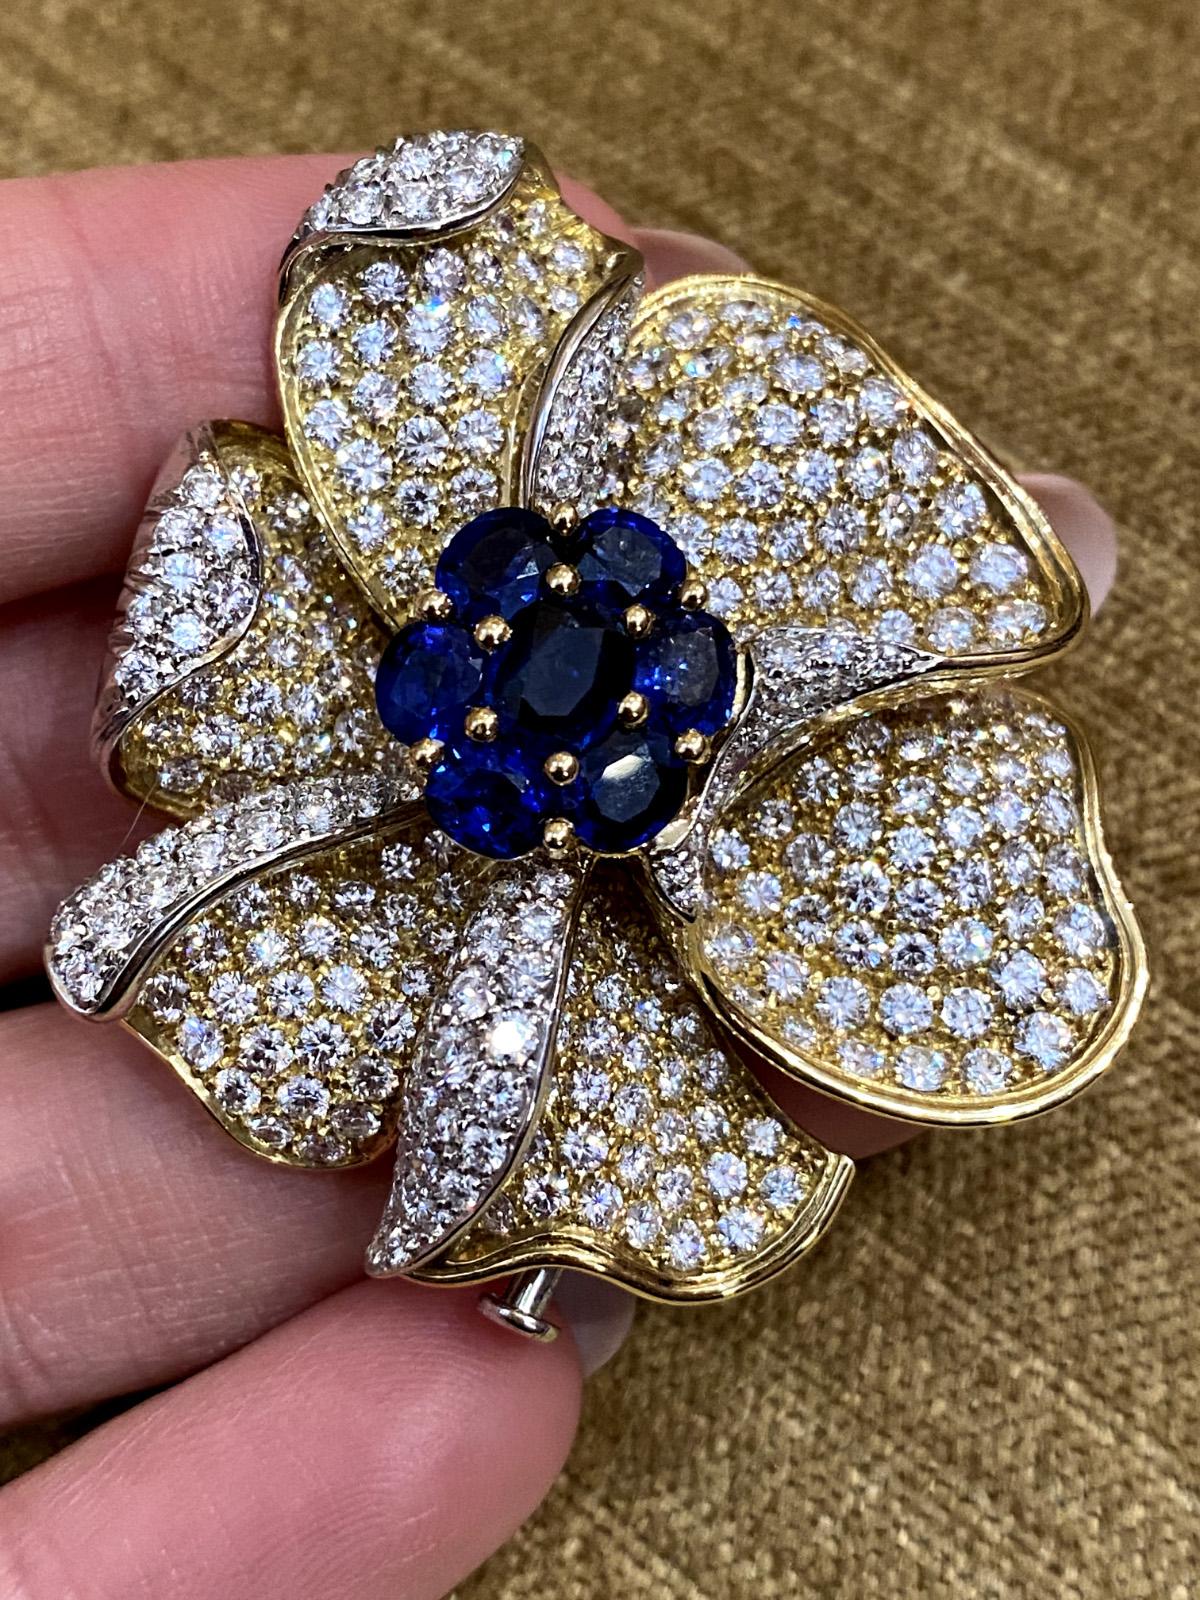 Picchiotti Sapphire and Diamond Flower Brooch in 18k Yellow Gold 

Diamond and Sapphire Brooch by PICCHIOTTI features fine quality Oval Blue Sapphires and Round Diamonds set in 18k Yellow Gold that come together to form a flower design. The brooch